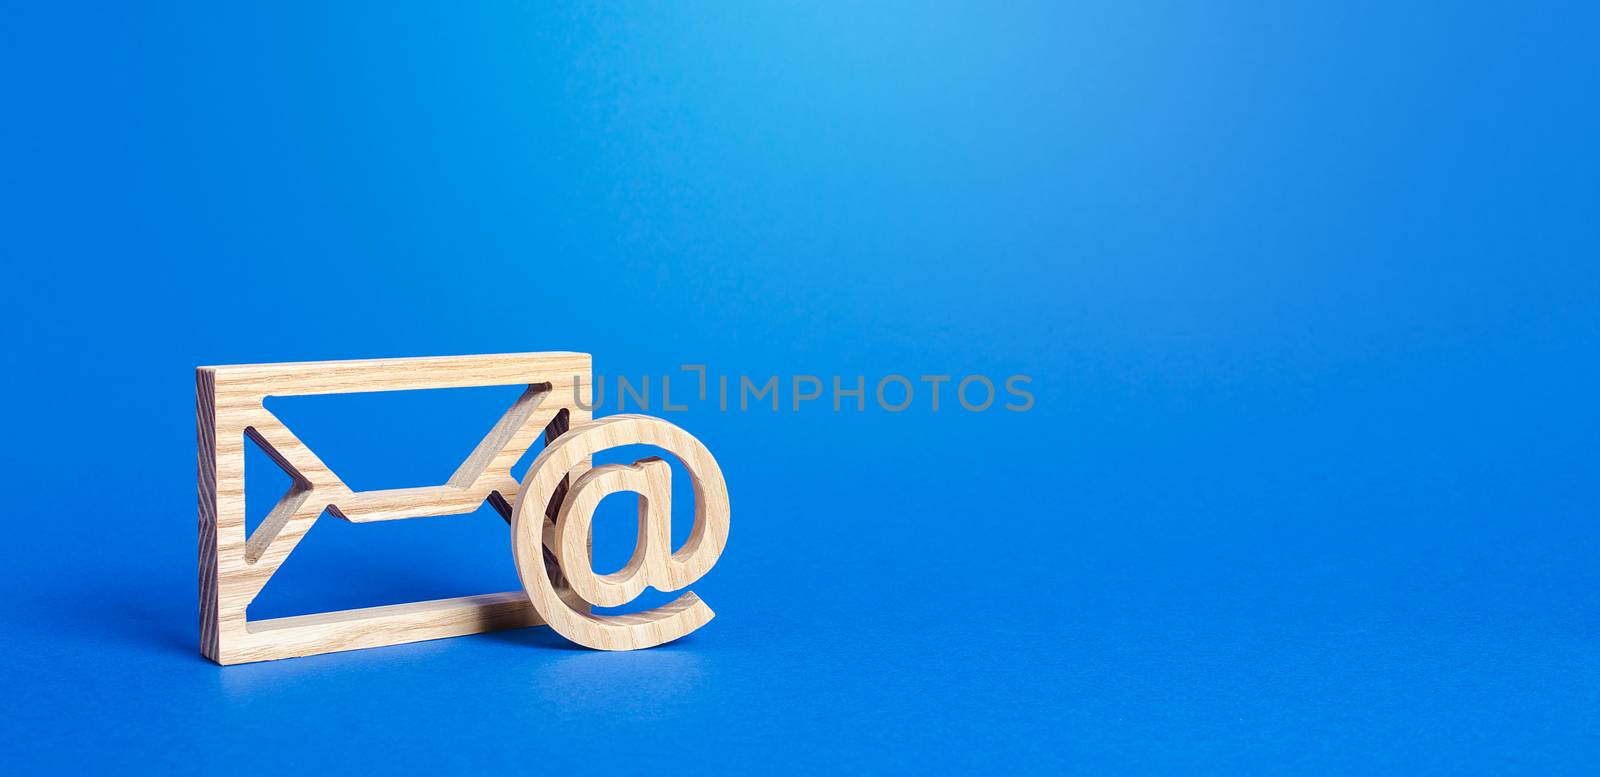 Email figure on blue background. Envelope and AT commercial sign symbol. Concept of email address. Contacts and communication. Business representations on the Internet and social media. Feedback by iLixe48